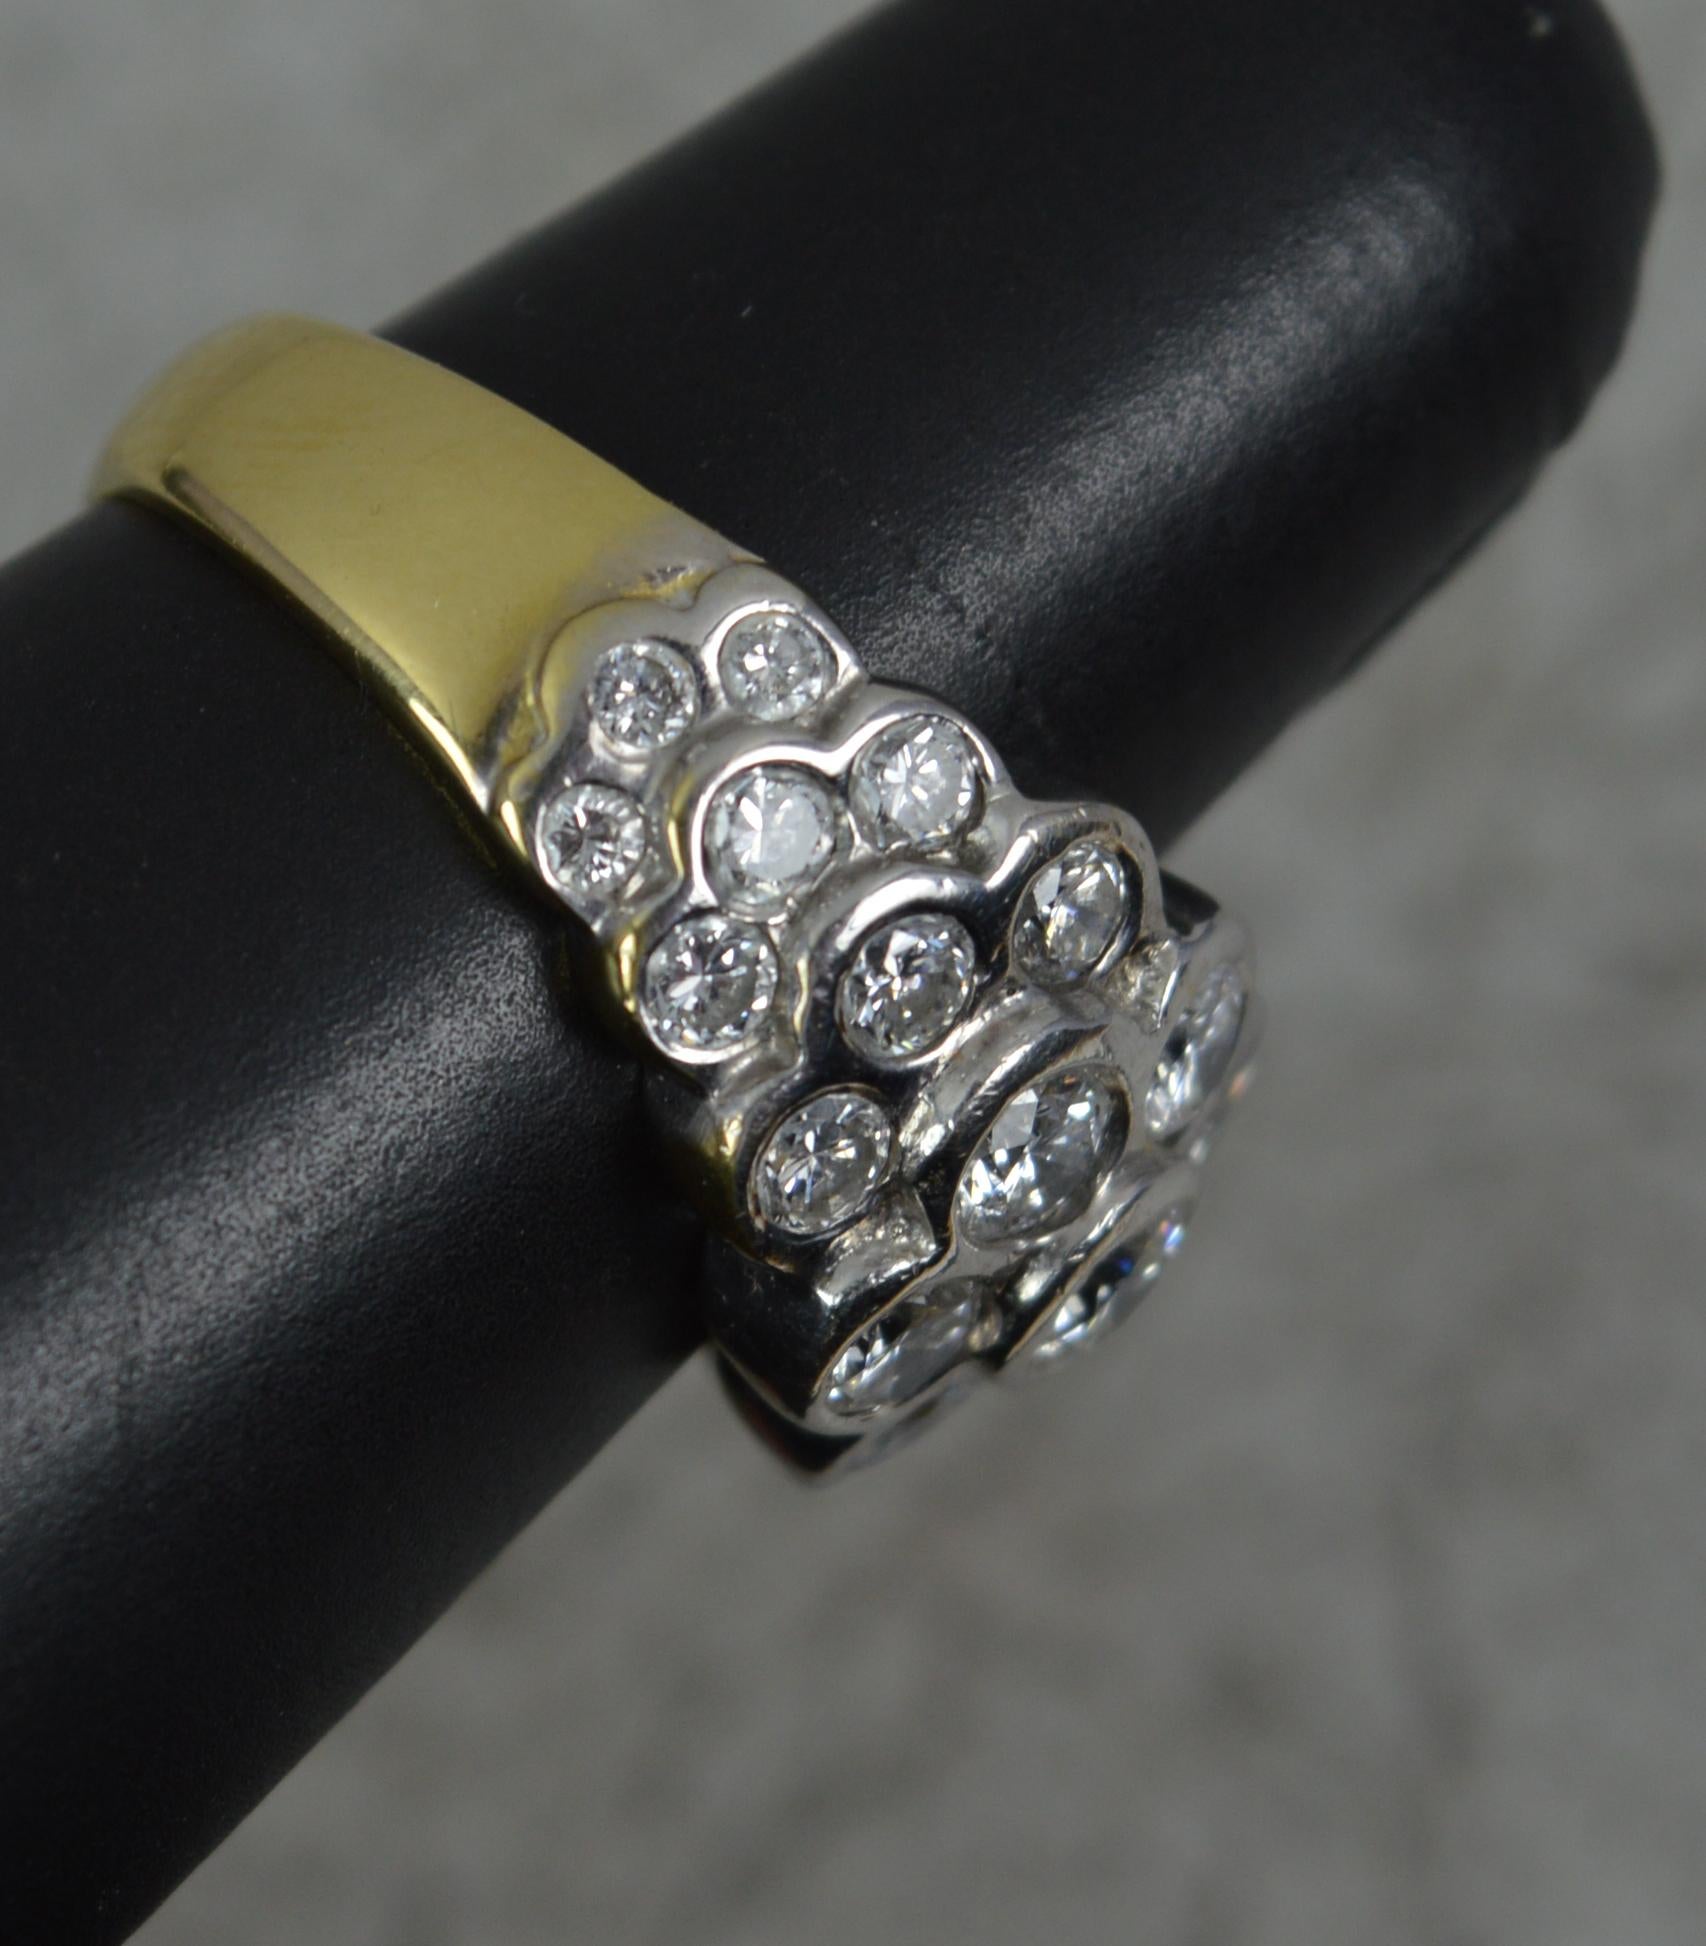 Quality 2.00 Carat Diamond and 18 Carat Gold Cluster Band Ring For Sale 4